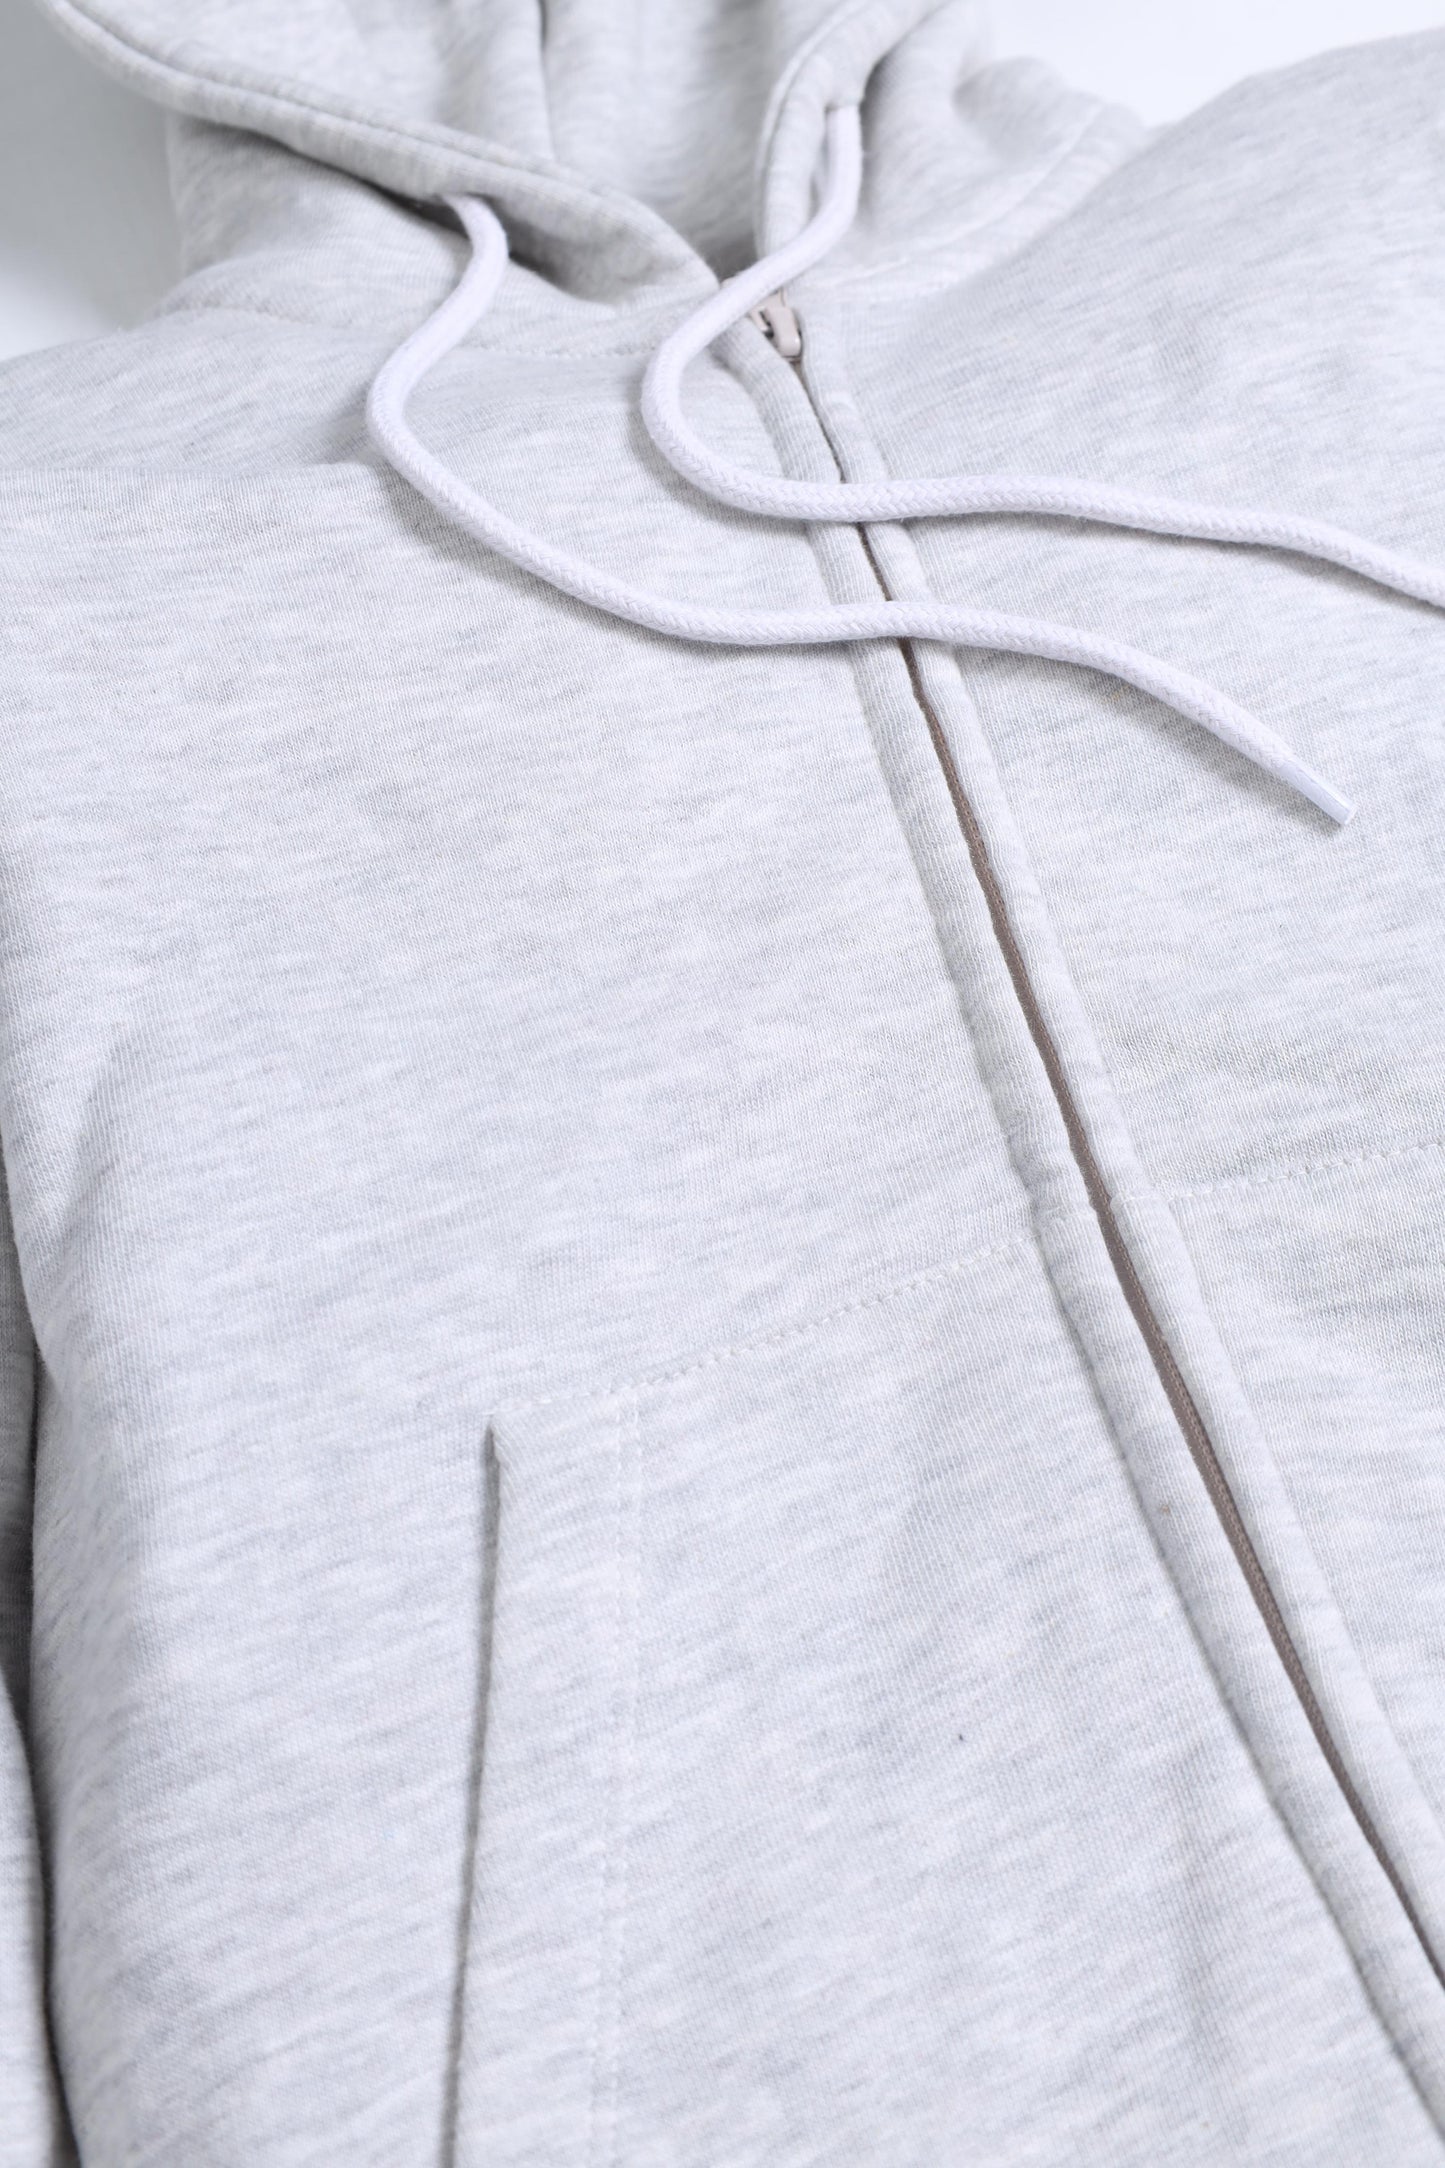 Zipper hoodies with contrast twill tape